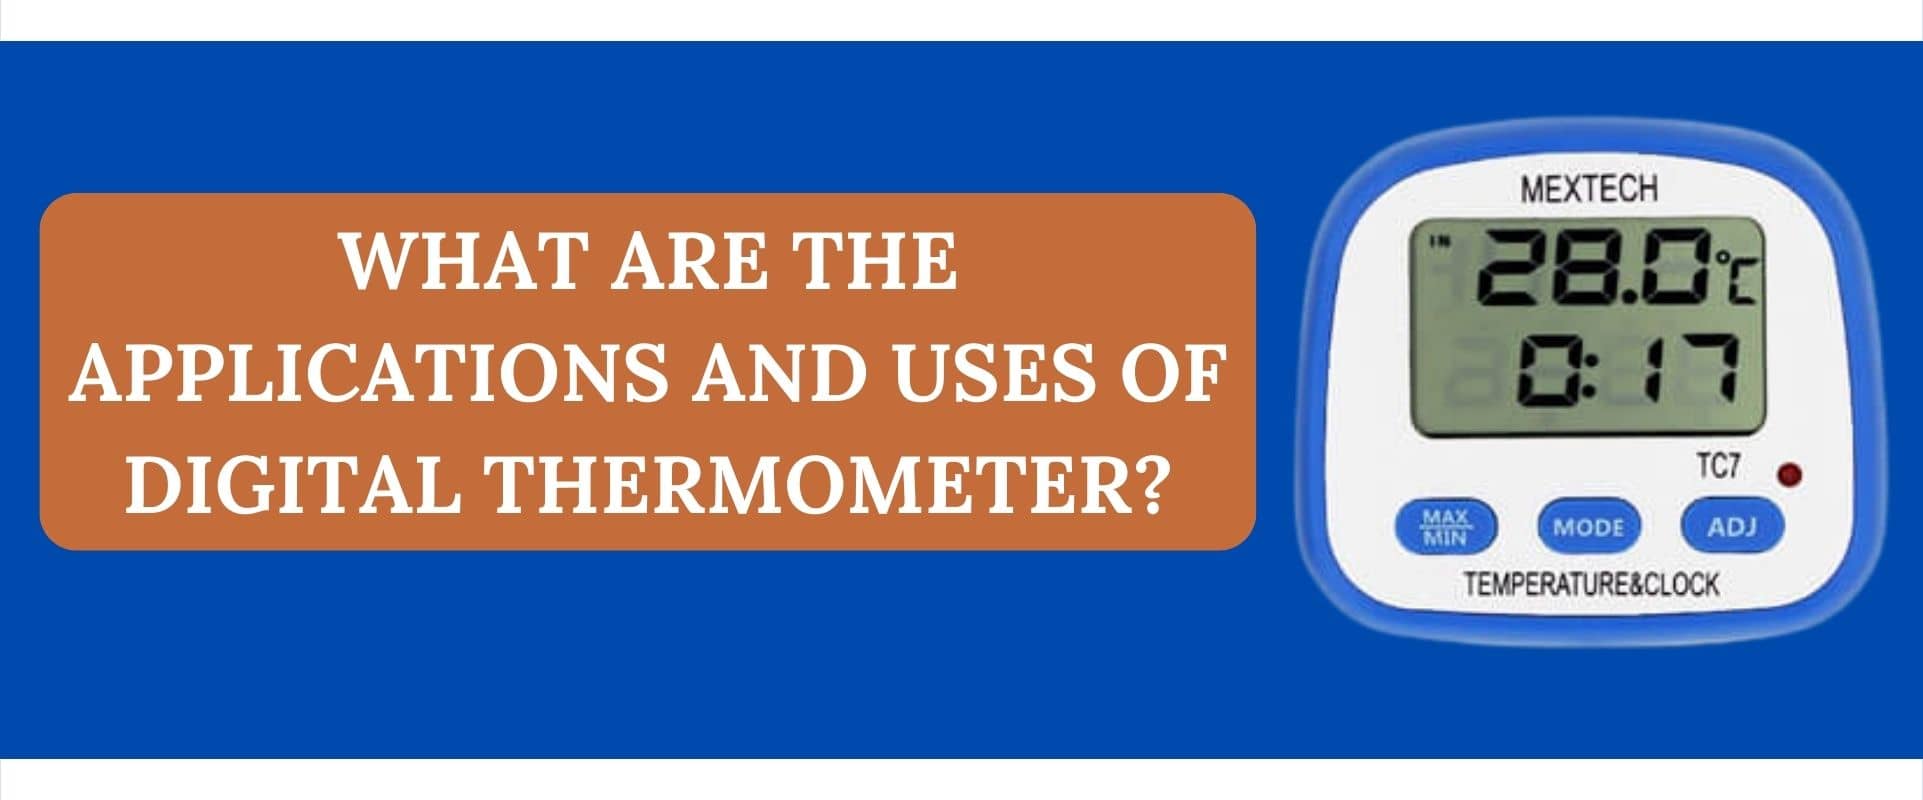 What are the Applications and Uses of Digital Thermometer?